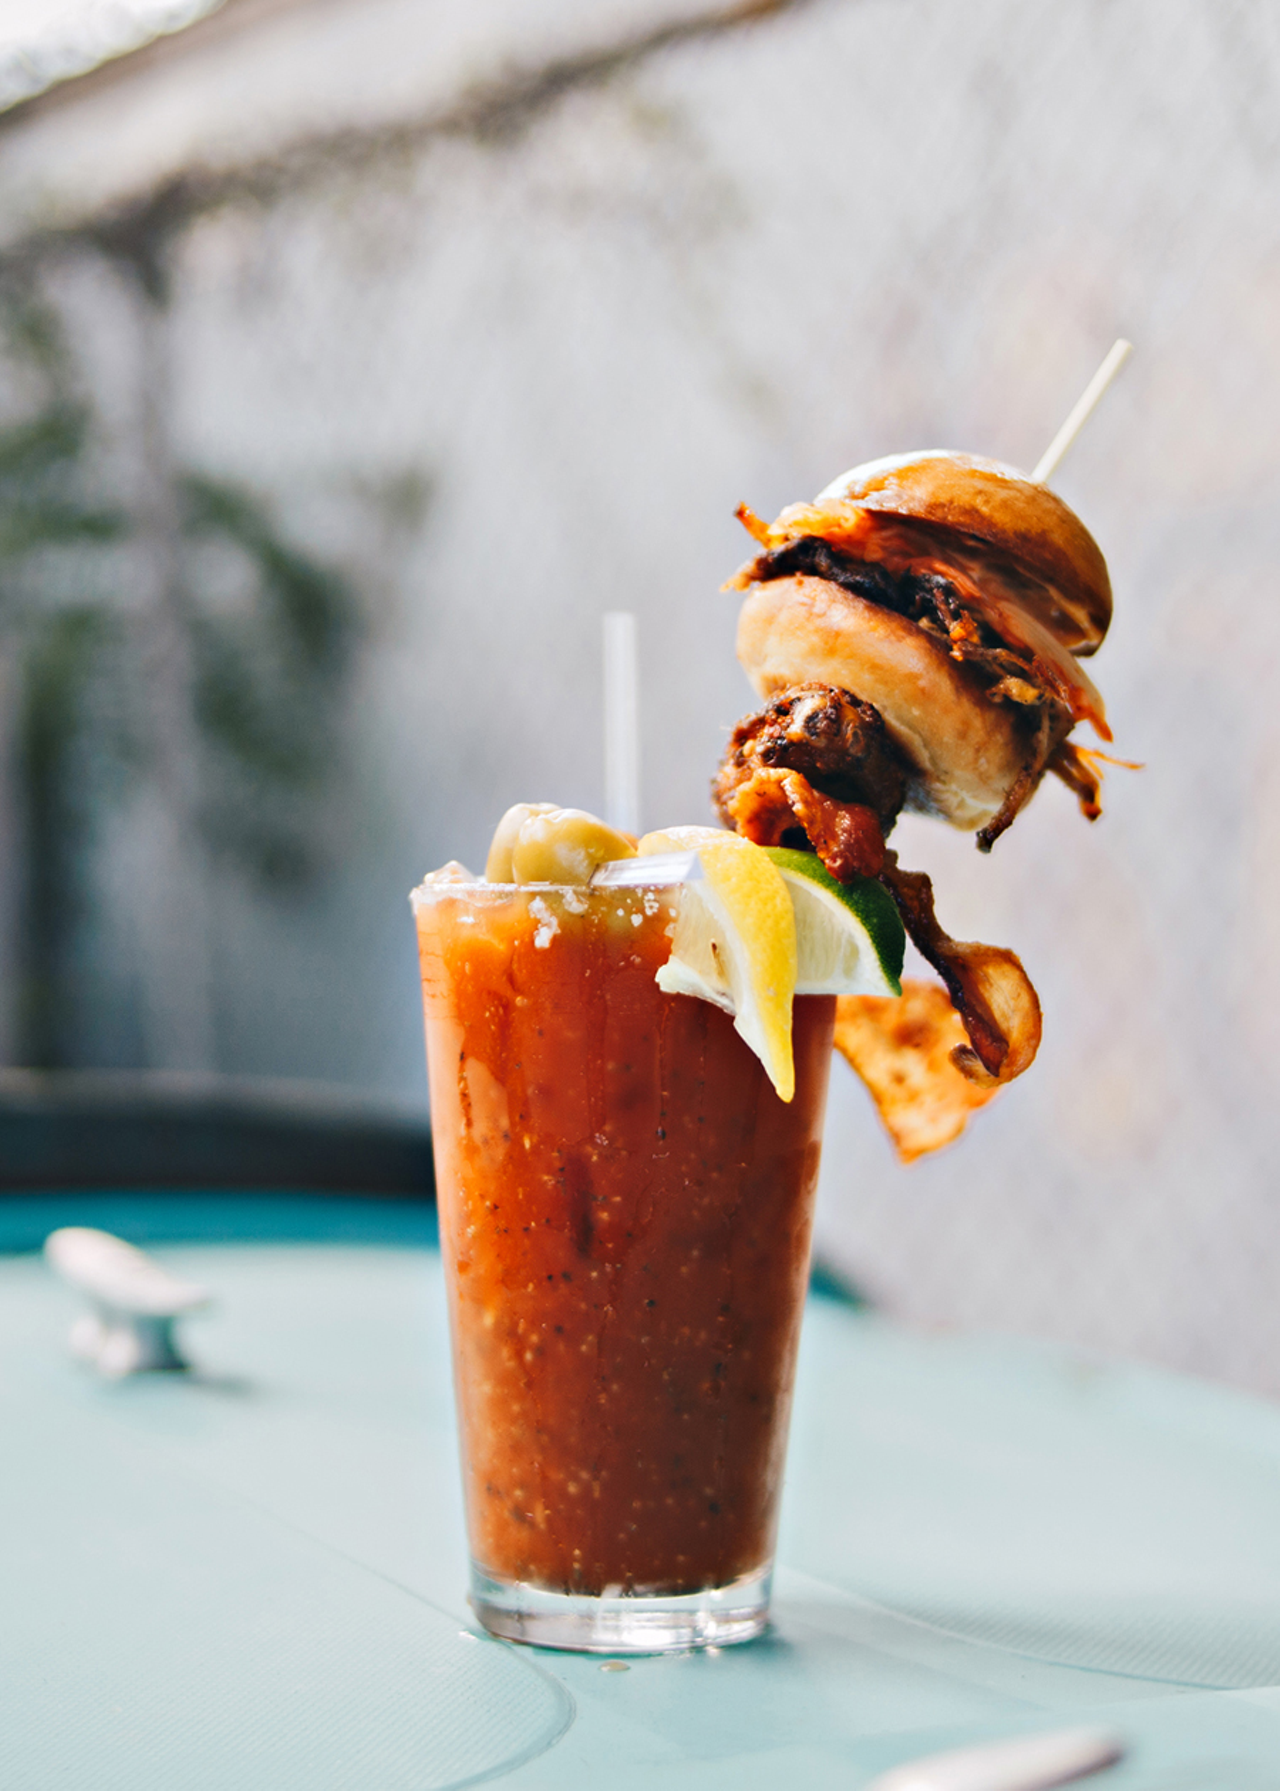 The Yacht Club Bloody from Northside Yacht Club is made with a secret homemade bloody mix (made fresh every Sunday) is infused with Tito’s vodka and citrus juices and then topped with an obscene smörgåsbord of meat: a house breakfast sausage slider, American hickory bacon, a house-smoked Amish wing and a piece of celery for good measure. The mix is balanced — not spicy or salty — but there are hot sauces available if you want to kick it up a notch.